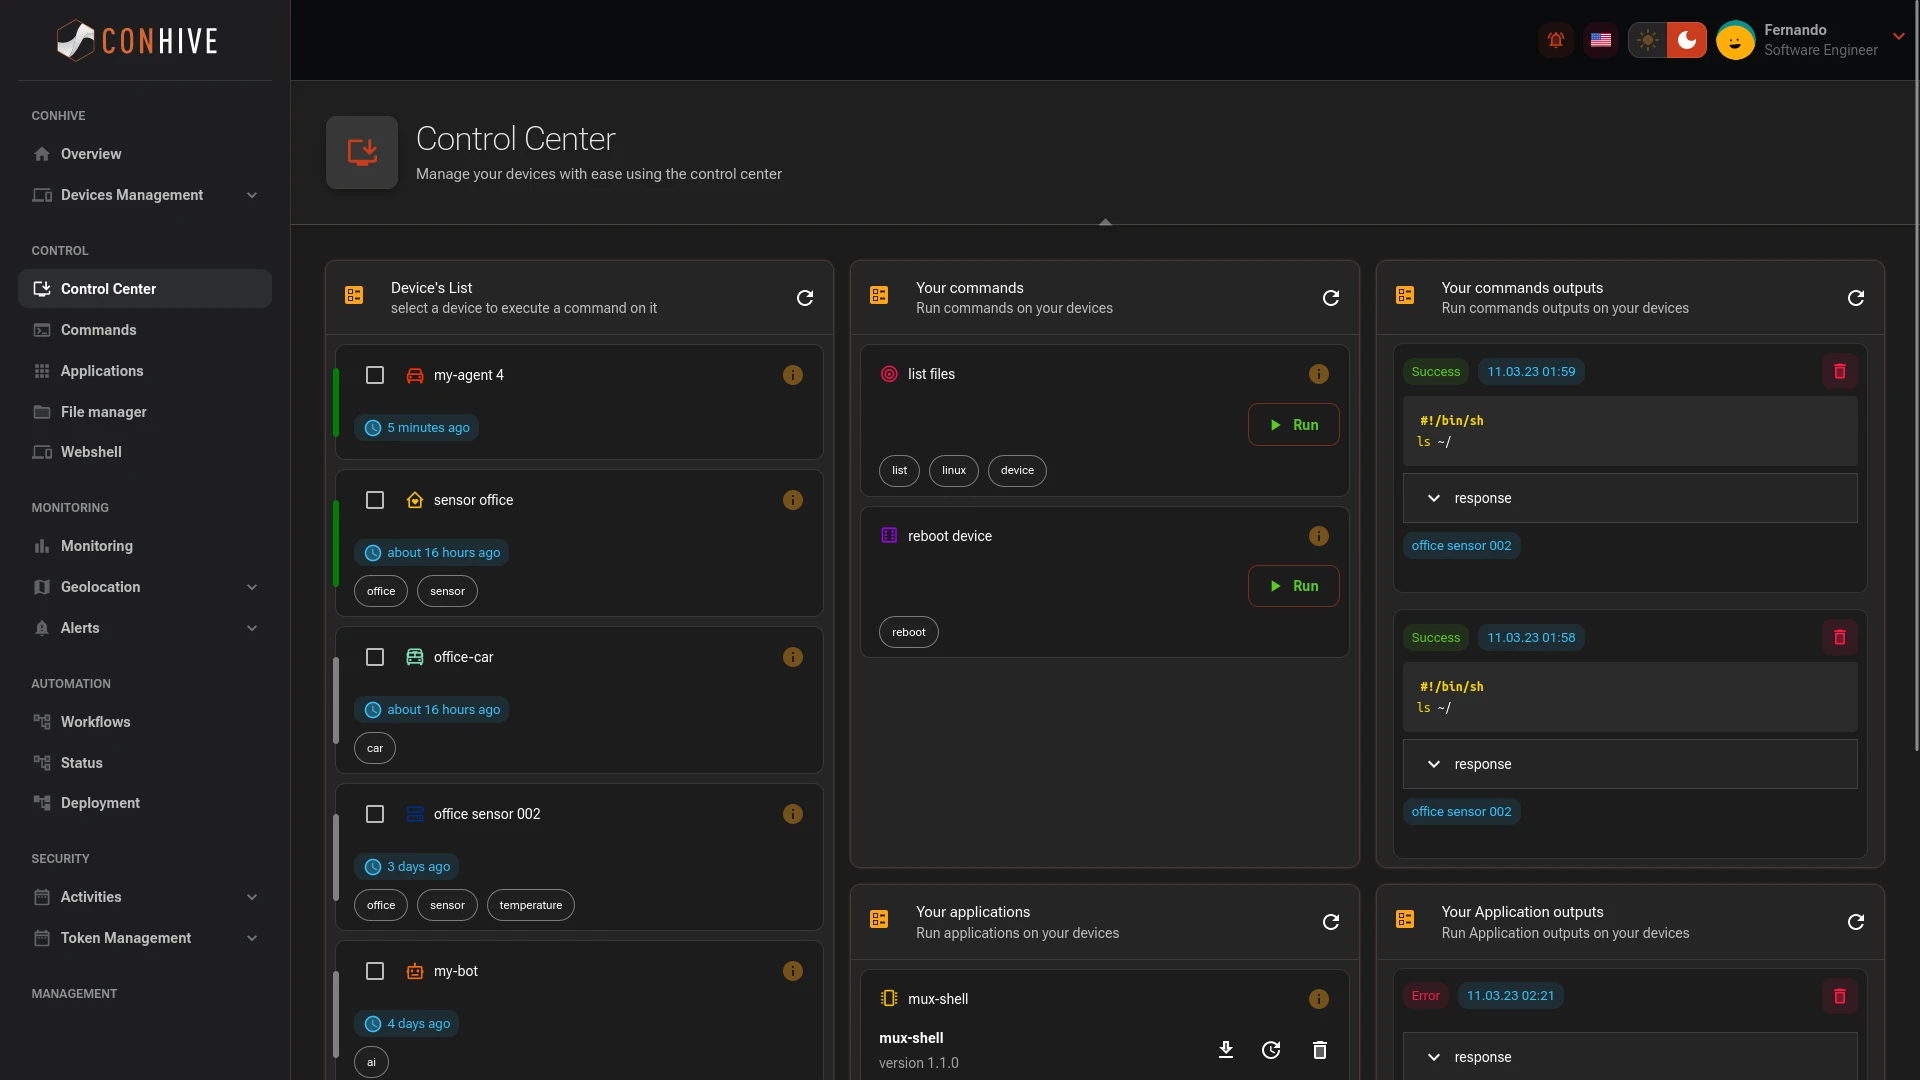 Deep Dive into Conhive's Extensive Device Control Capabilities